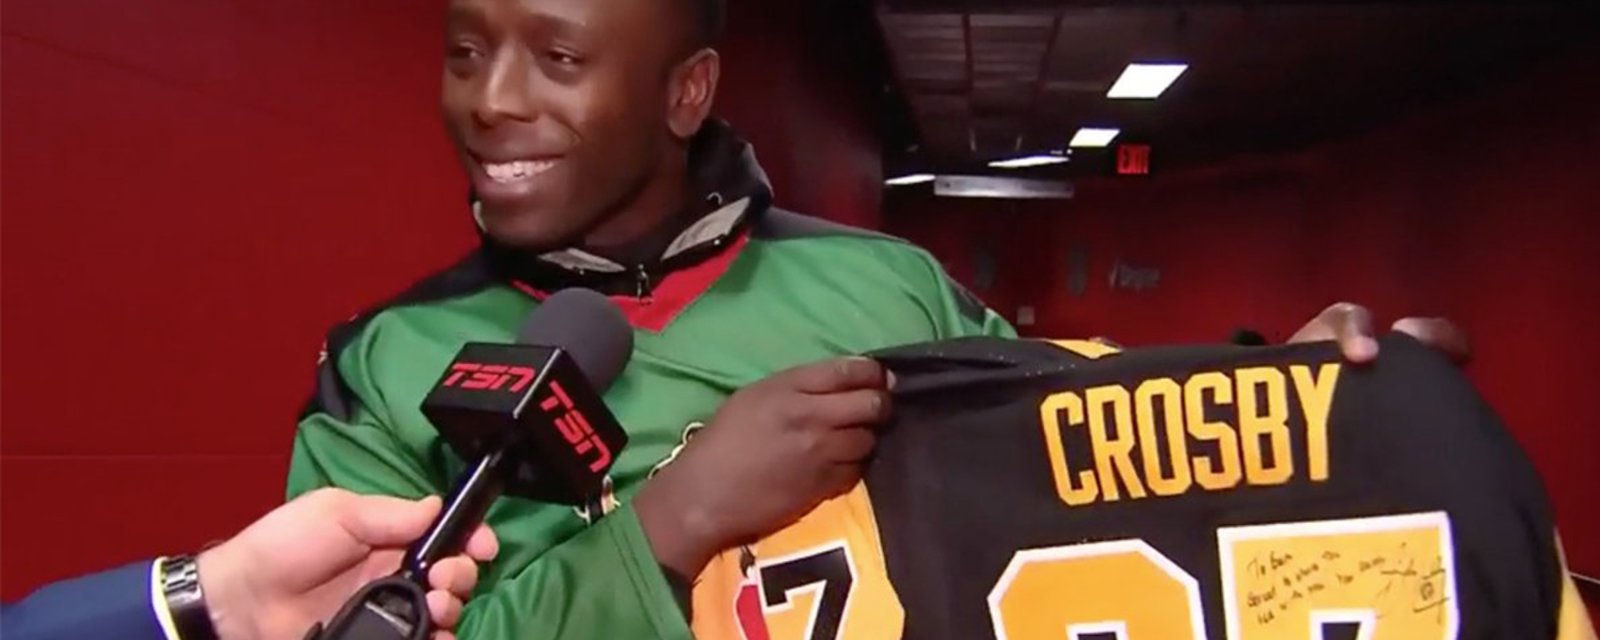 Crosby goes over the top for viral video Youtube star from Kenyan hockey team